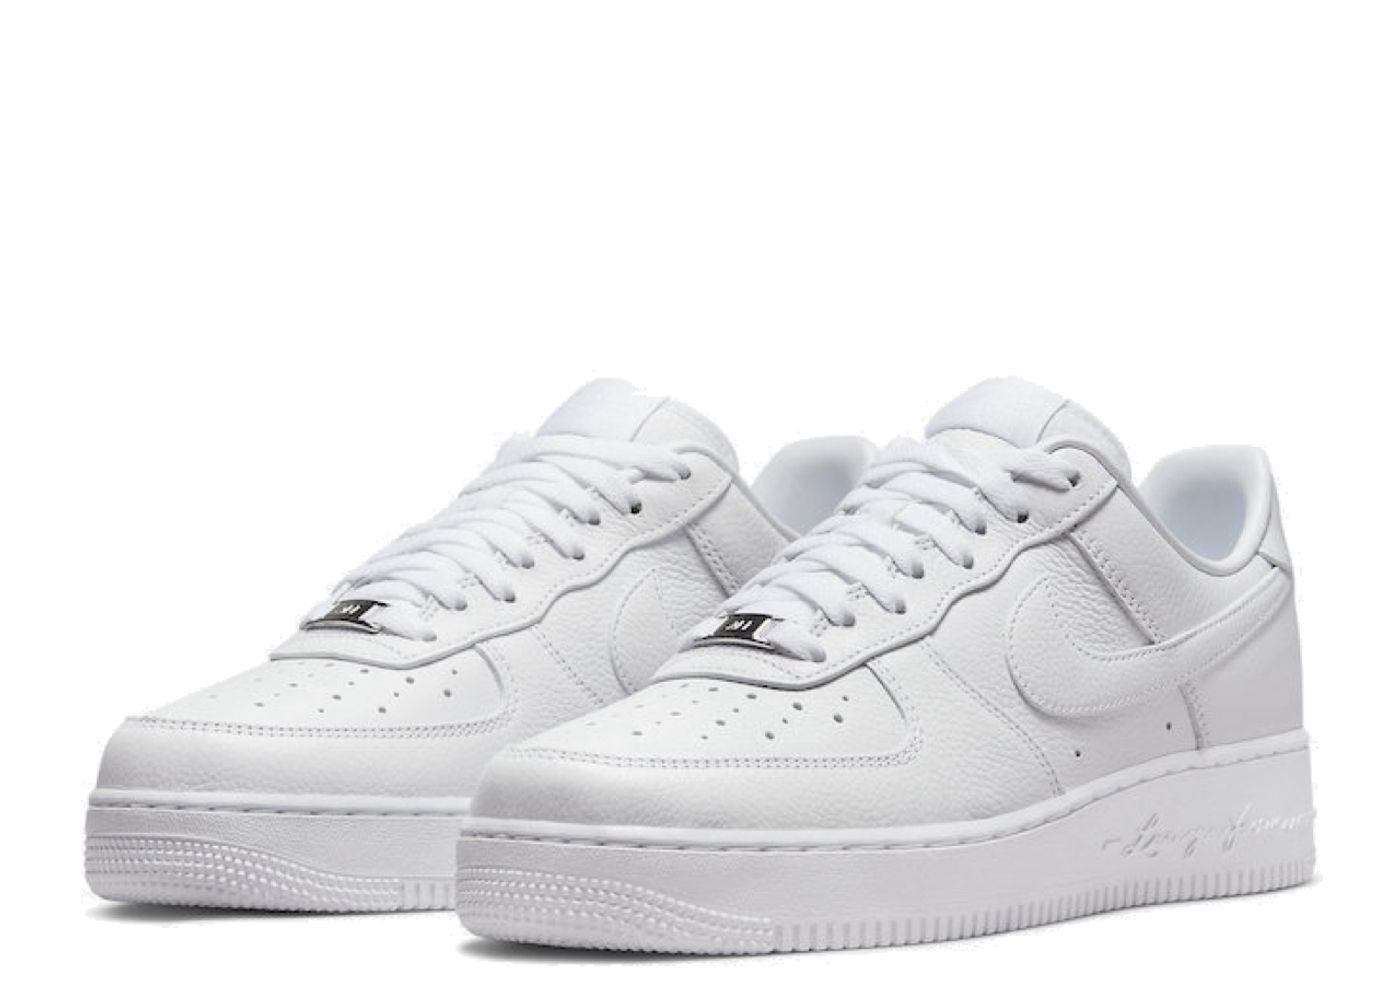 Nike Air Force 1 07 Craft White for Sale, Authenticity Guaranteed